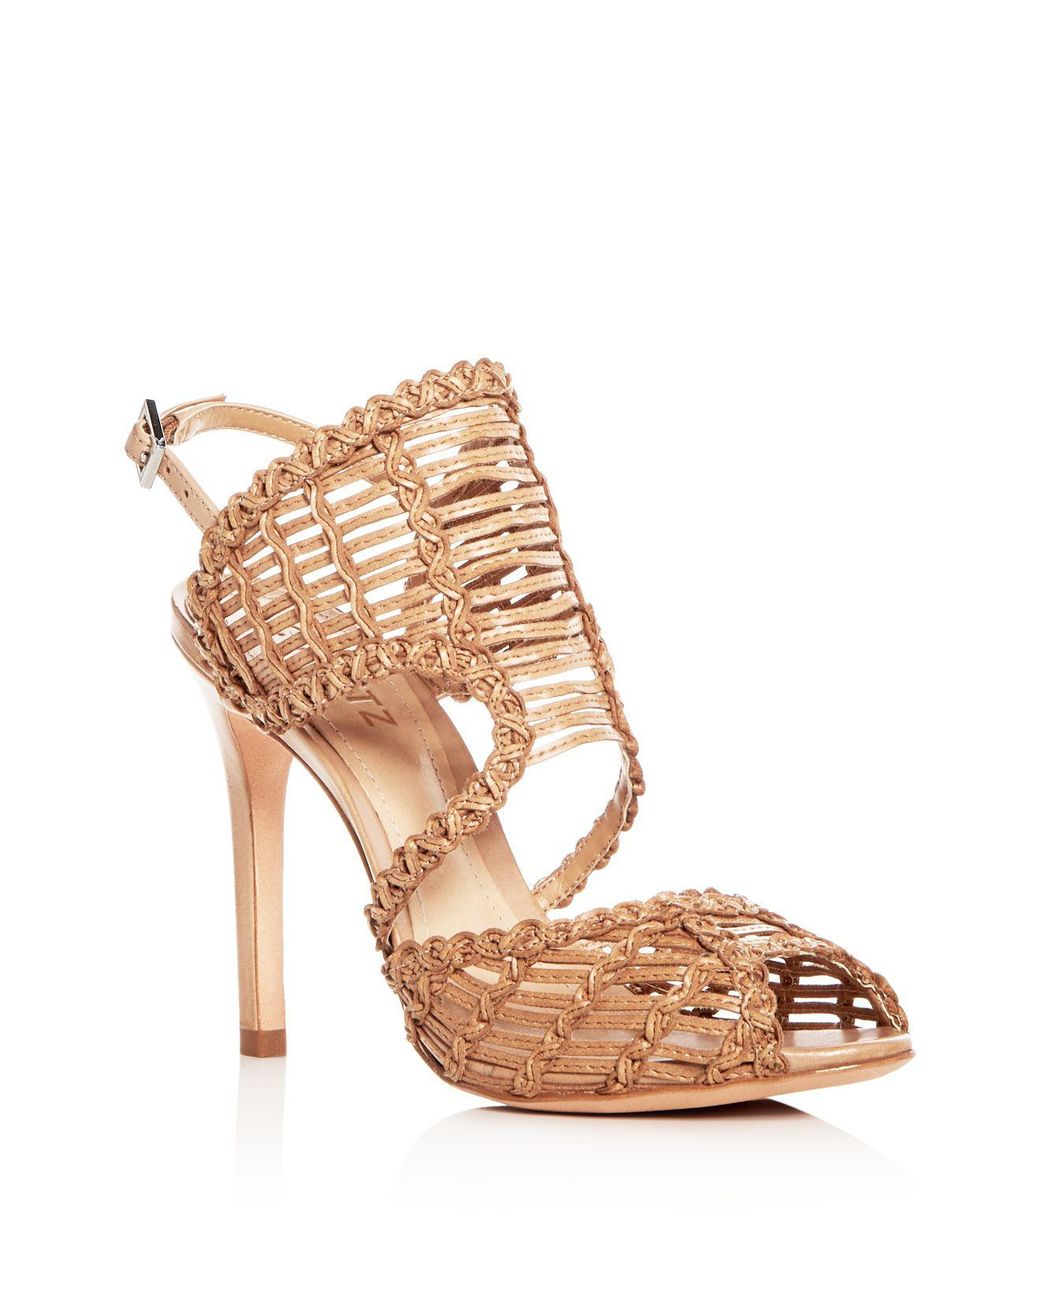 SCHUTZ SHOES Women's Thamis Woven Leather Caged High-heel Sandals | Lyst